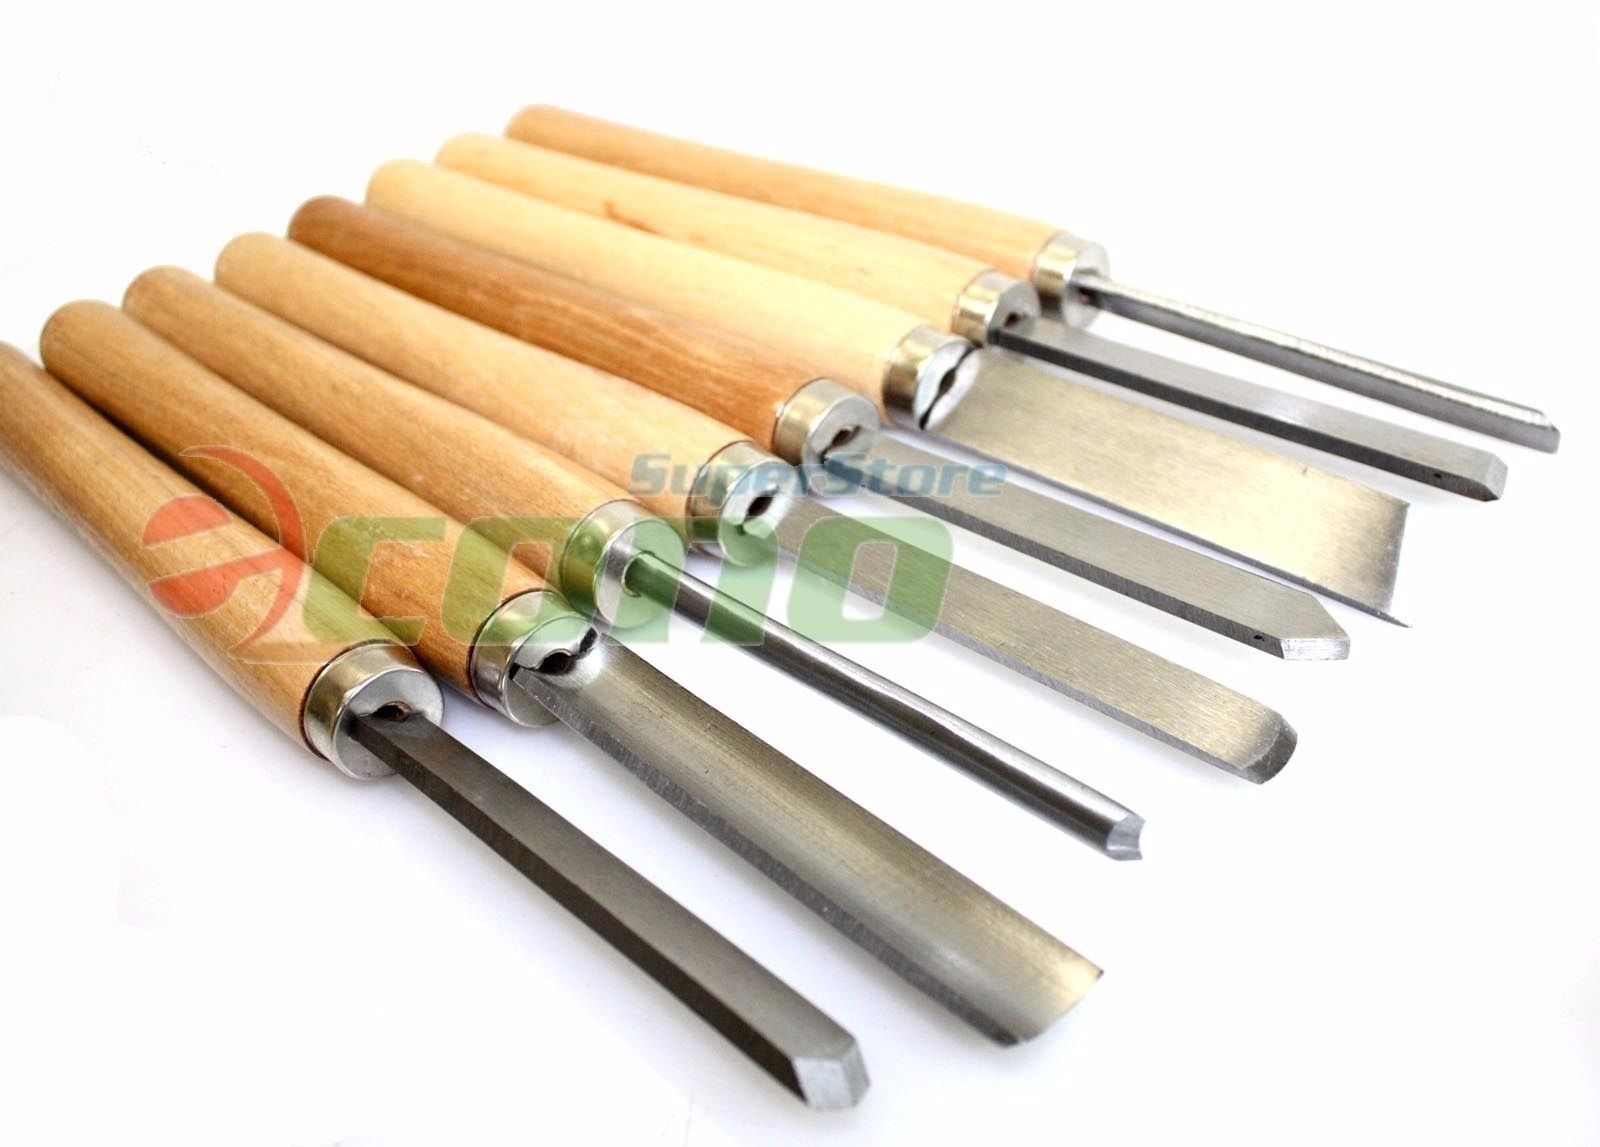 Silver 8Pcs Wood Turning Lathe Chisel Set Spear Woodworking Carving Hand Tools 